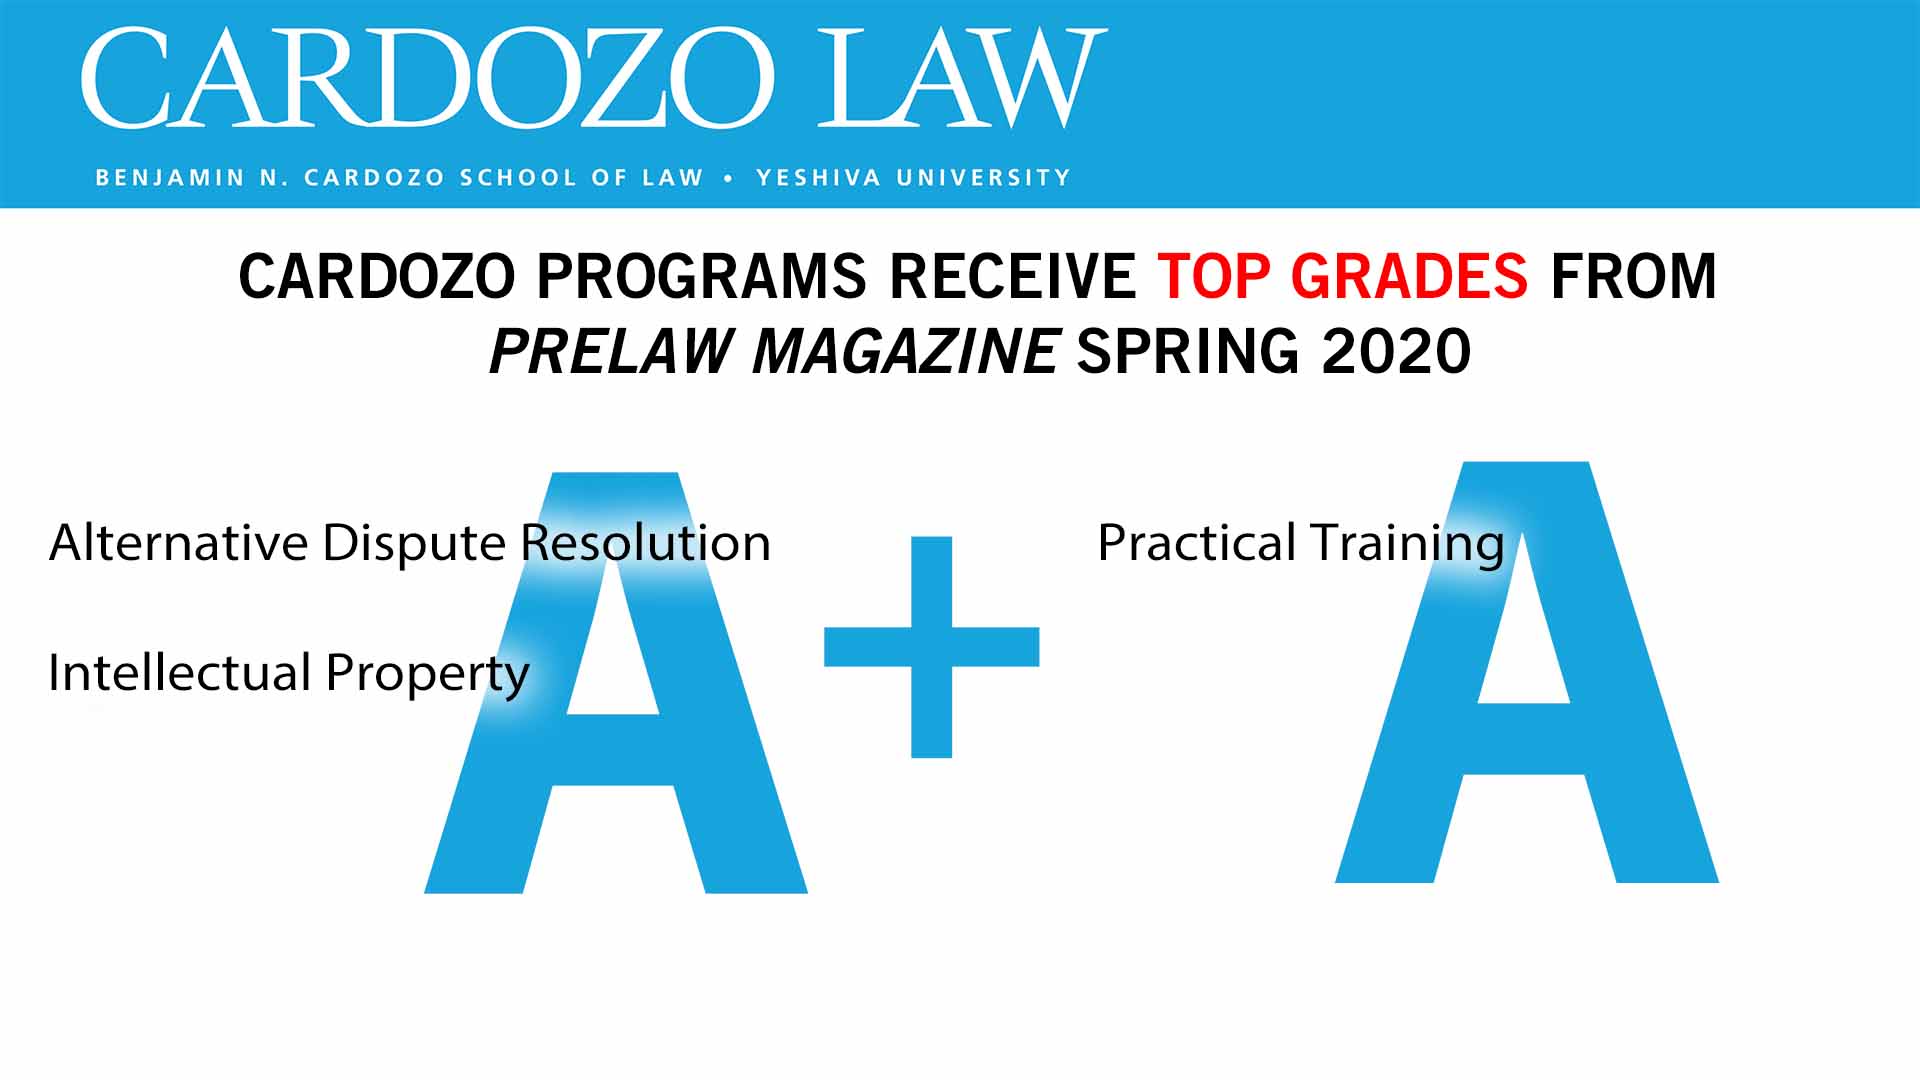 Cardozo Programs Get High Grades from preLaw Magazine Spring 2020 Issue